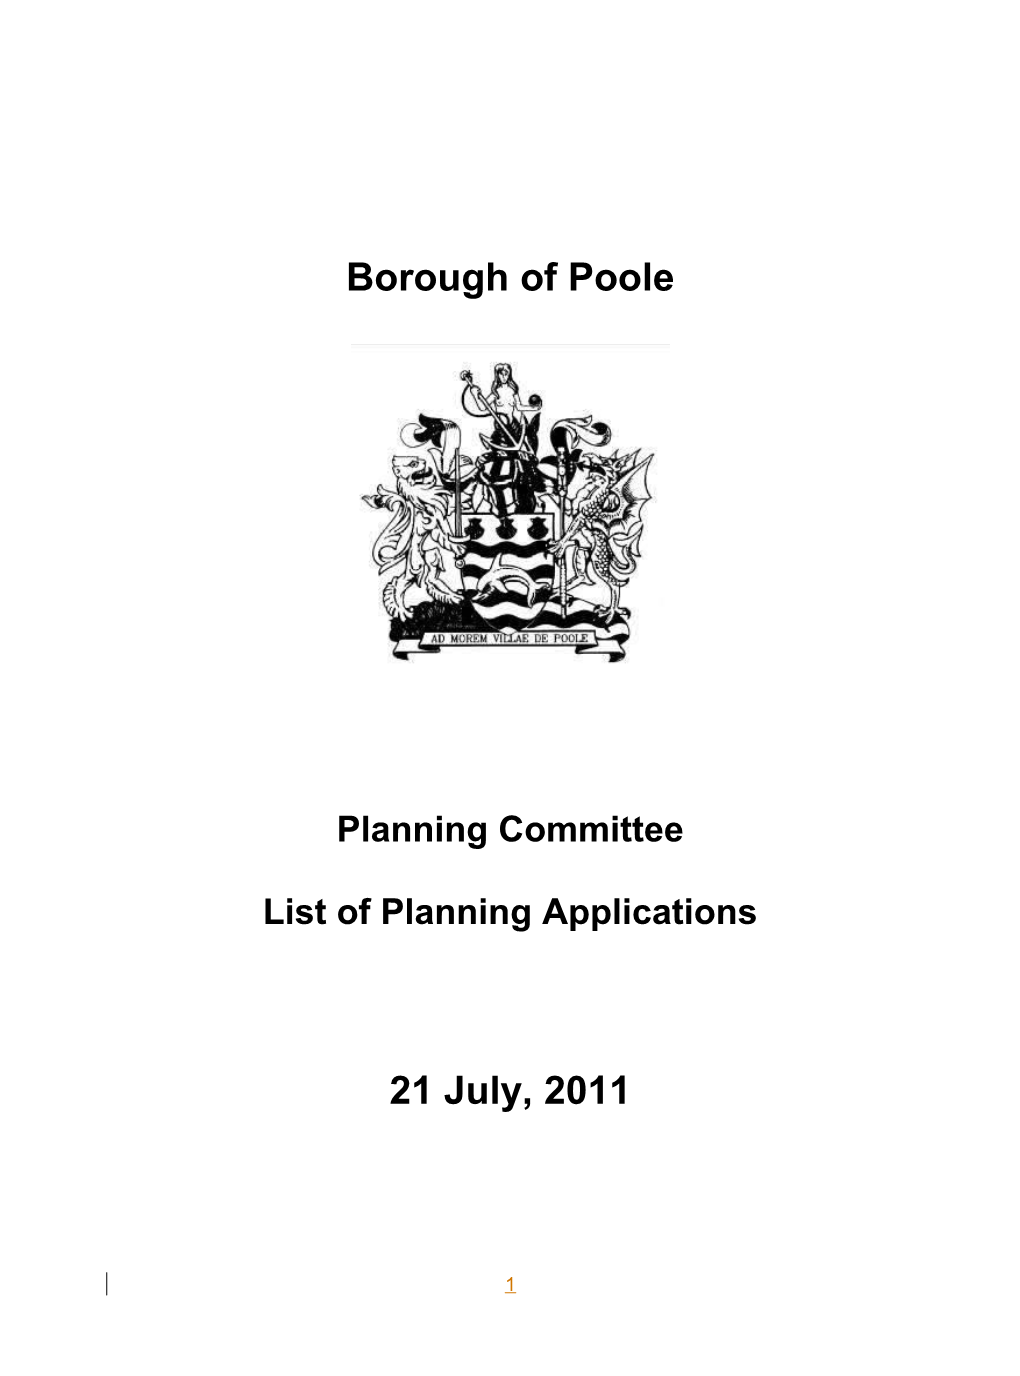 Report - Planning Committee List of Planning Applications July 2011